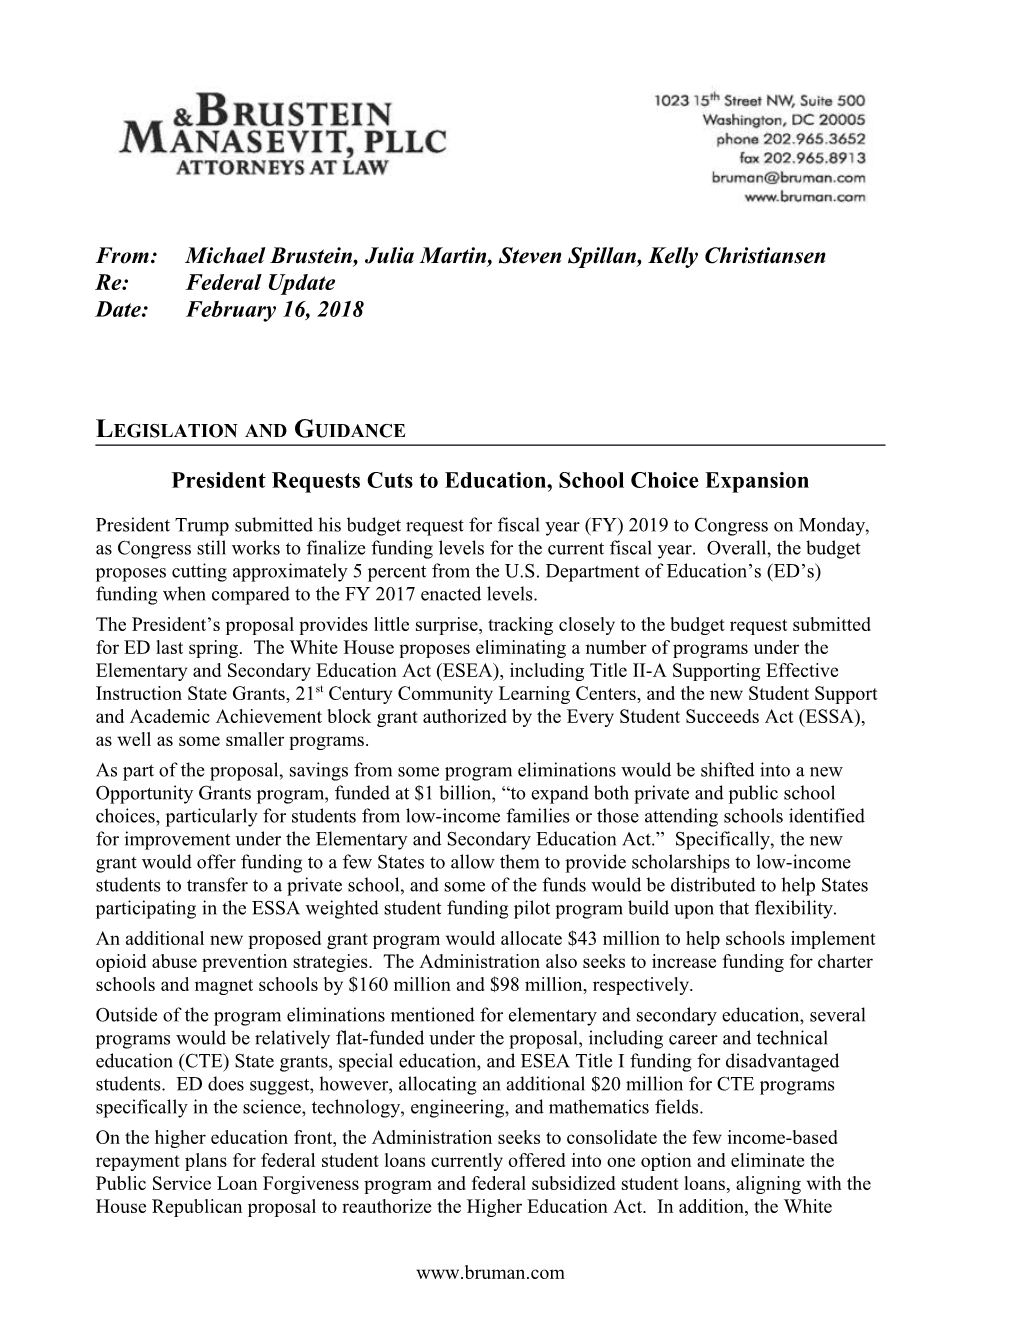 Federal Update February 16, 2018 - Government Affairs (CA Dept of Education)